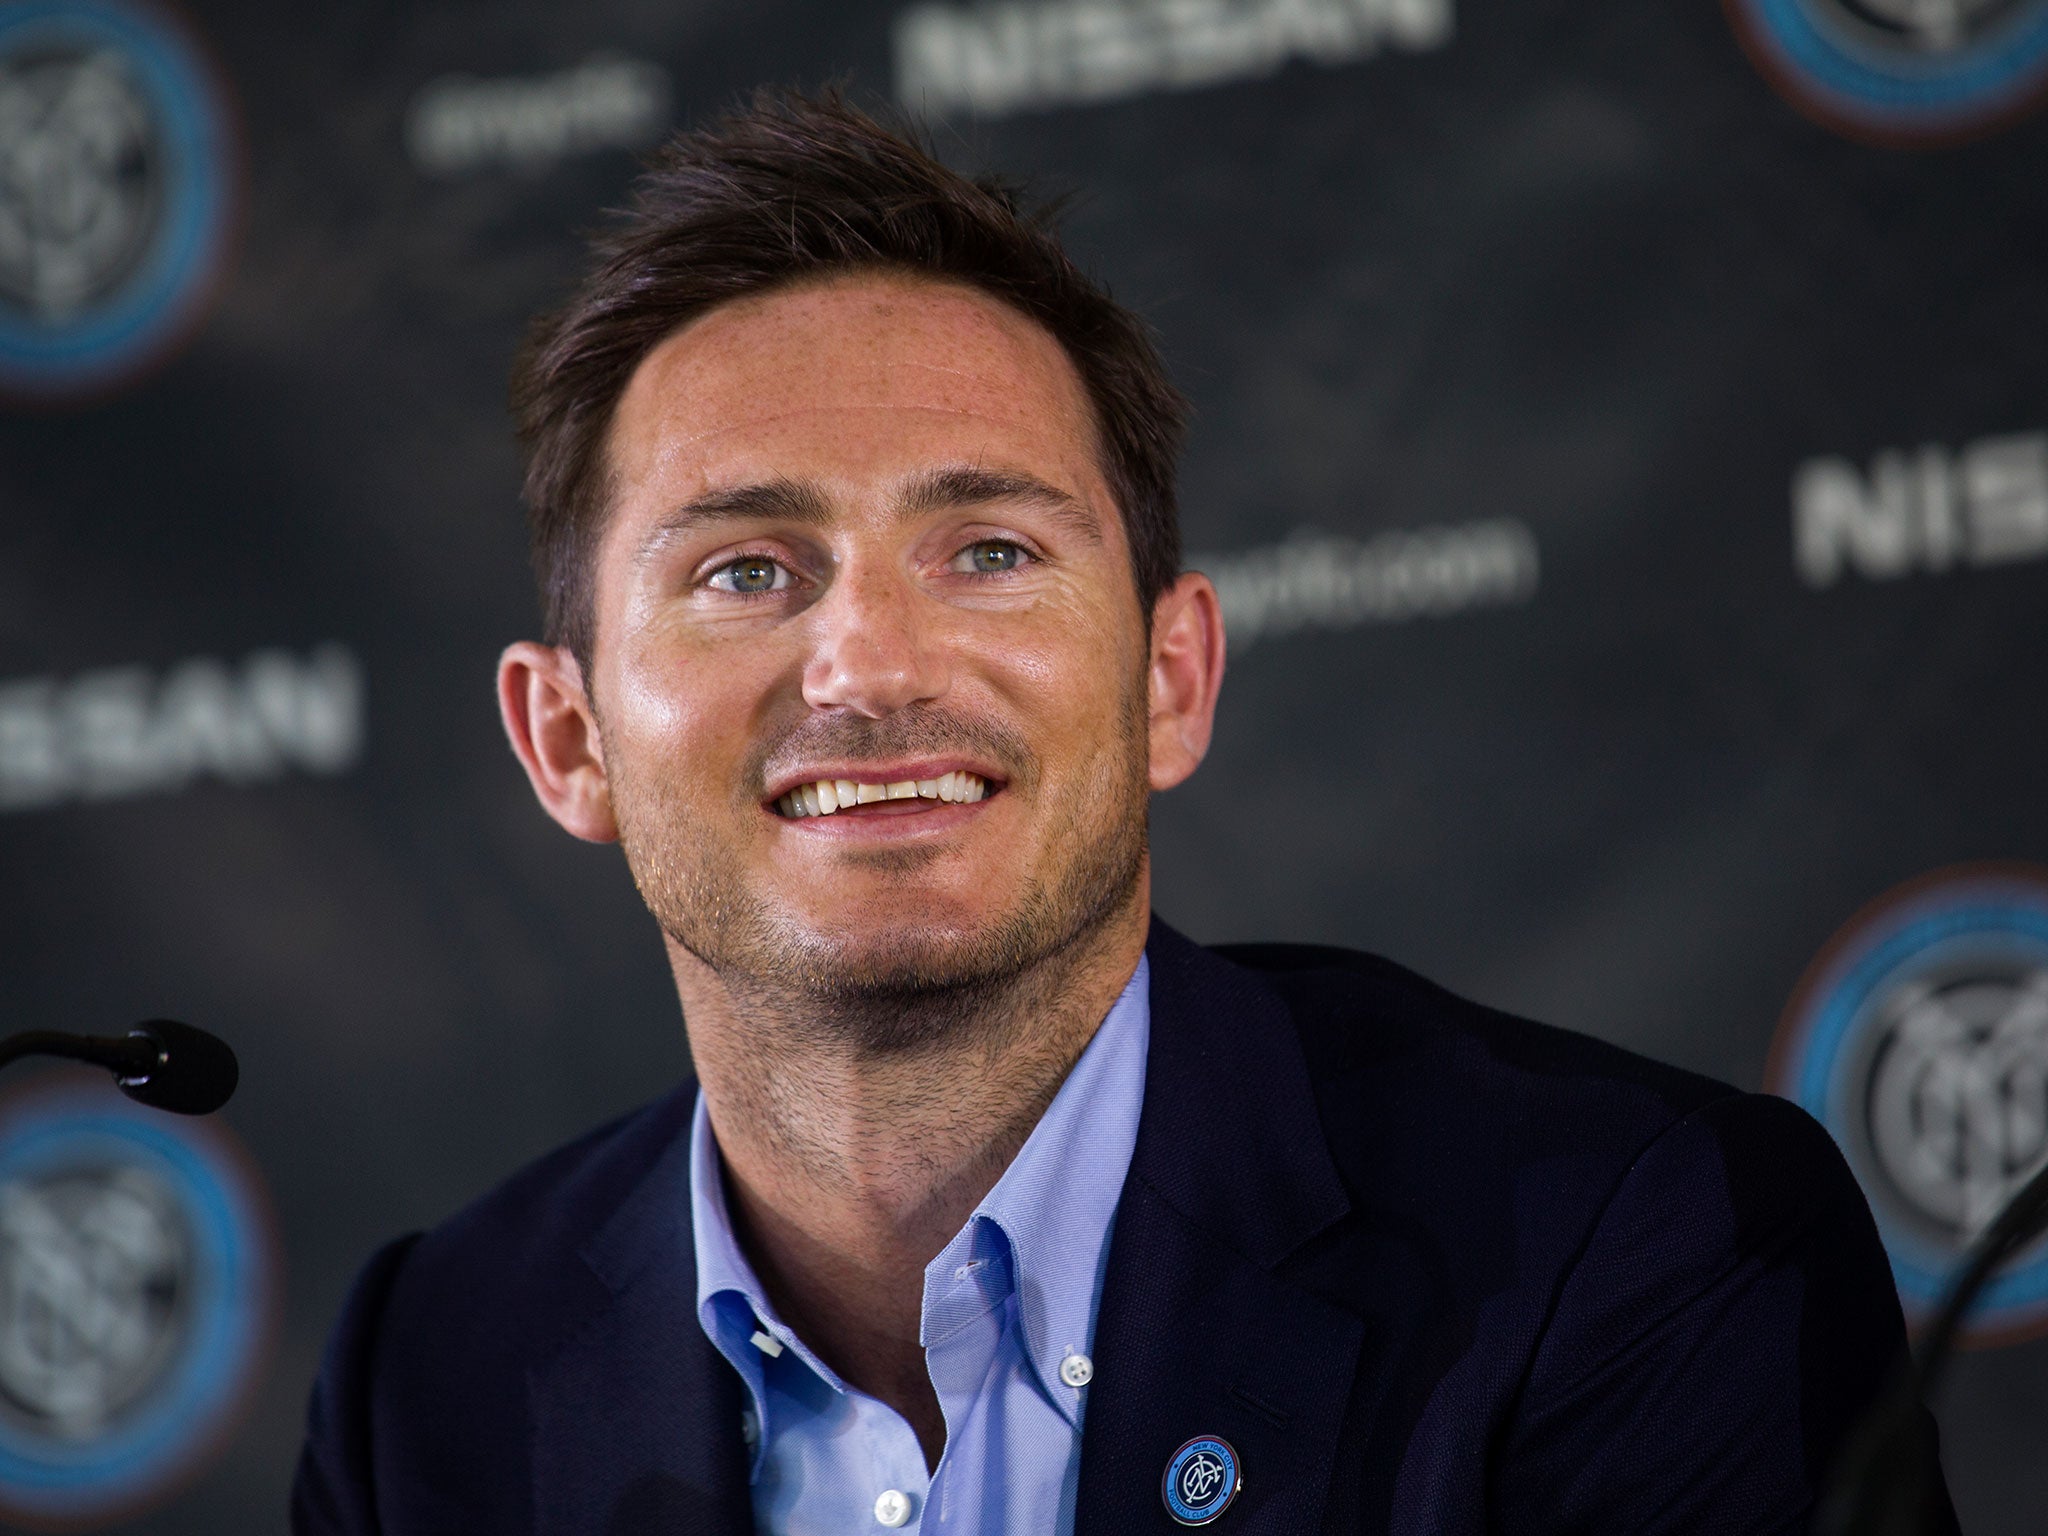 Frank Lampard will join City on loan from their sister club New York City